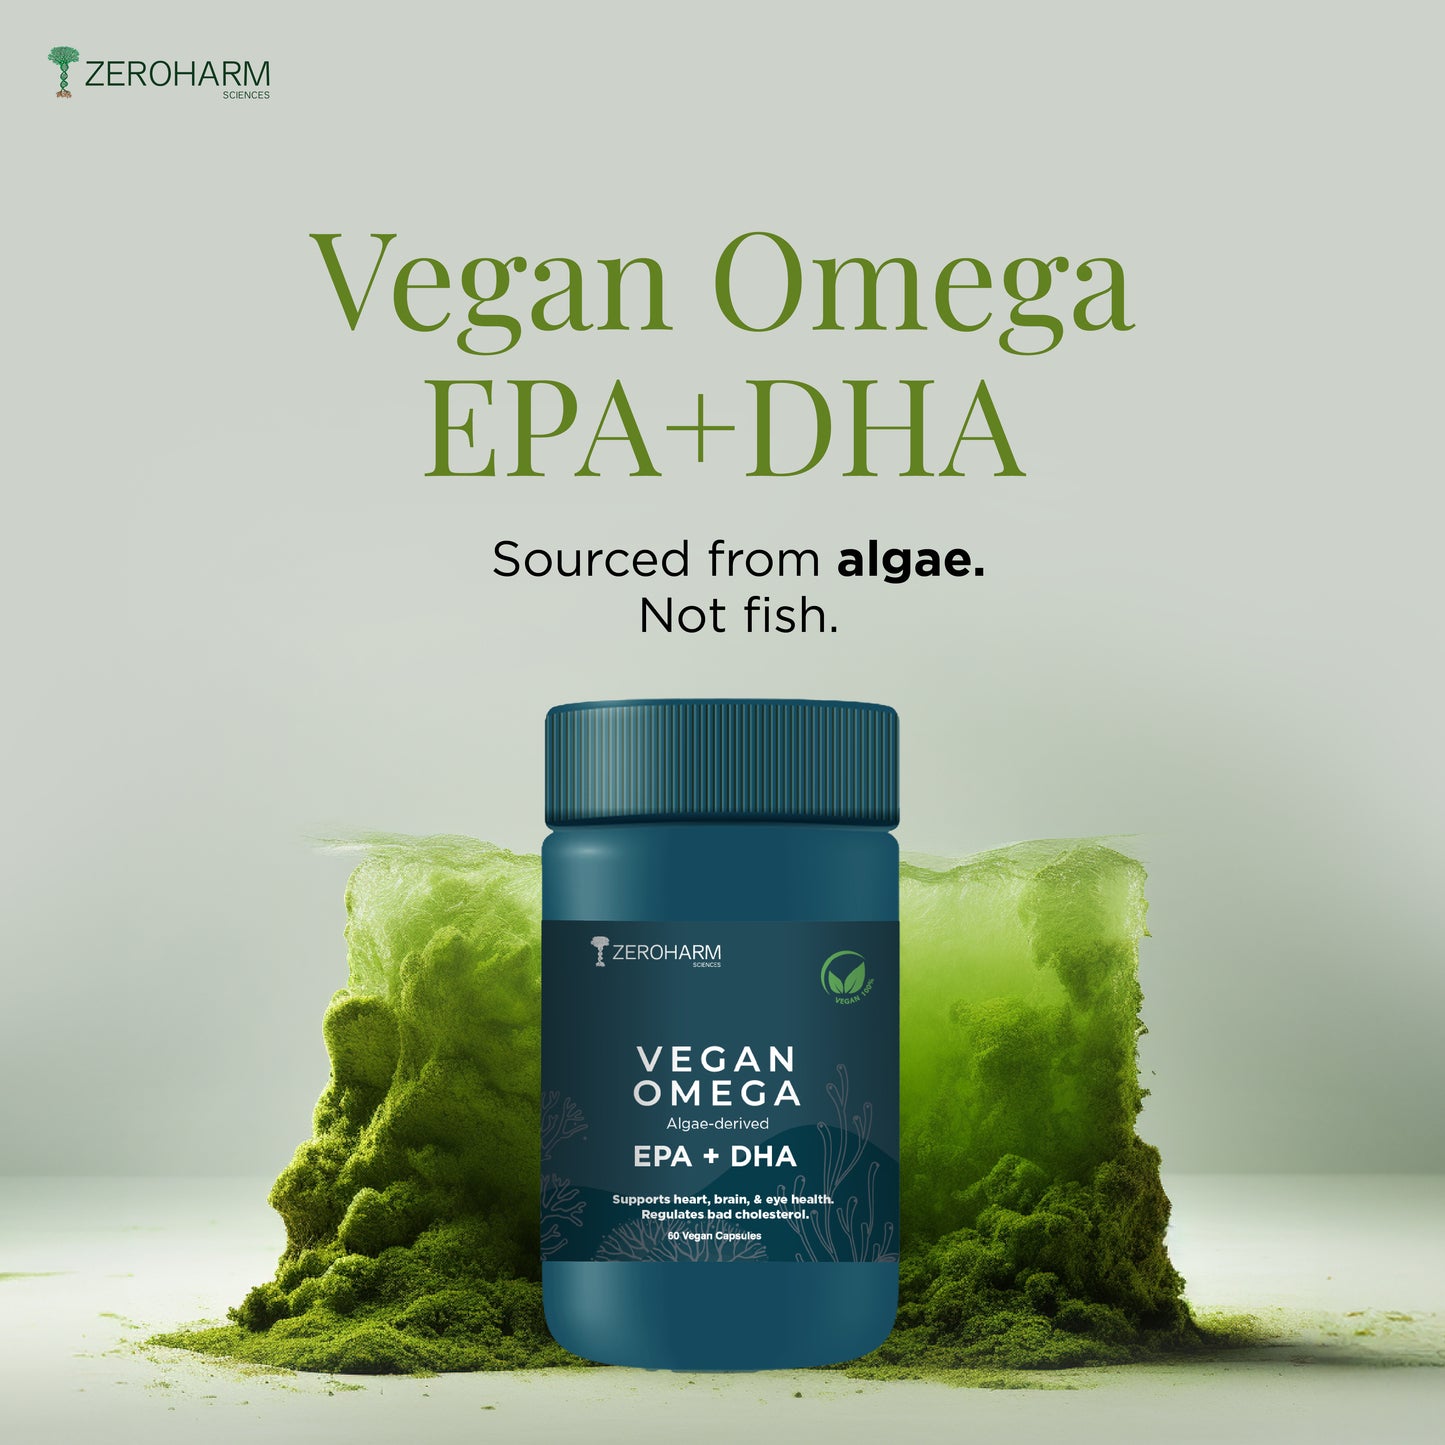 epa dha supplement made with algae not fish